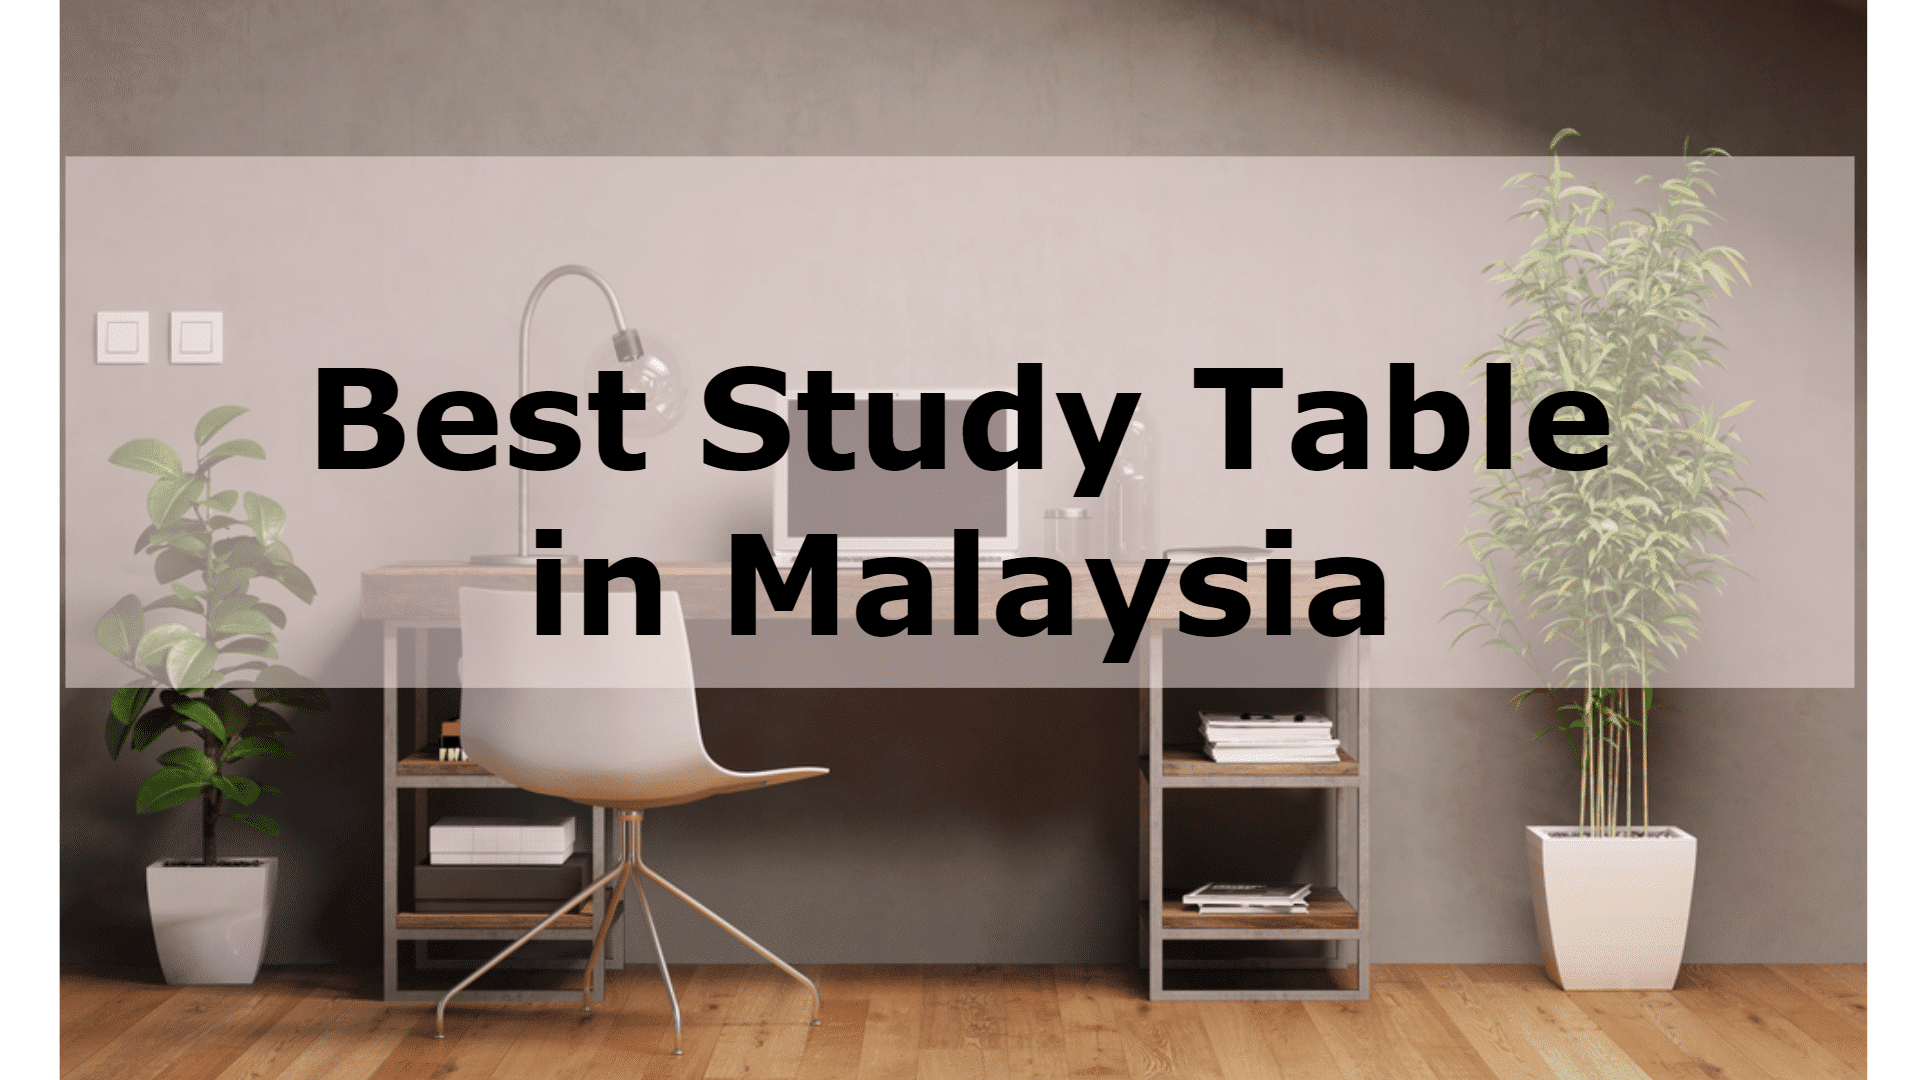 study table with shelf Malaysia, Which table is best for study?, What is a desk with shelves called?, How can I make my study table attractive?, What is a study table called?, Is a study table necessary?, What is the cost of small study table?, study table Malaysia online, customised study table Malaysia, study table with shelf Malaysia, study table Malaysia ikea, best study table Malaysia, cheap study table Malaysia, ikea study table, long study table Malaysia,